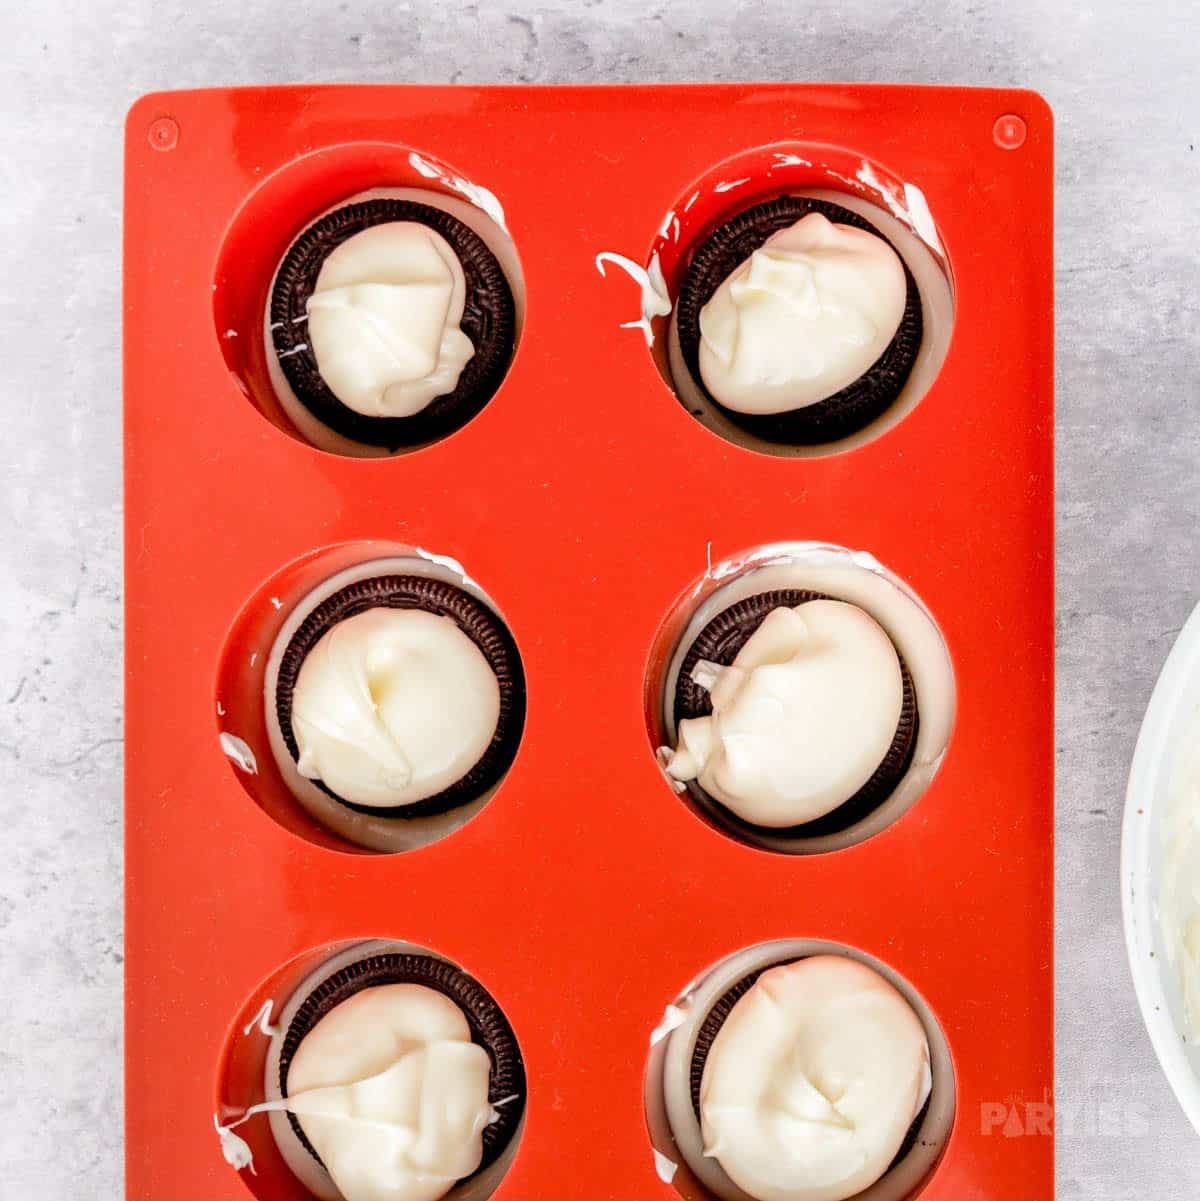 White chocolate is dolloped on top of Oreo cookies.